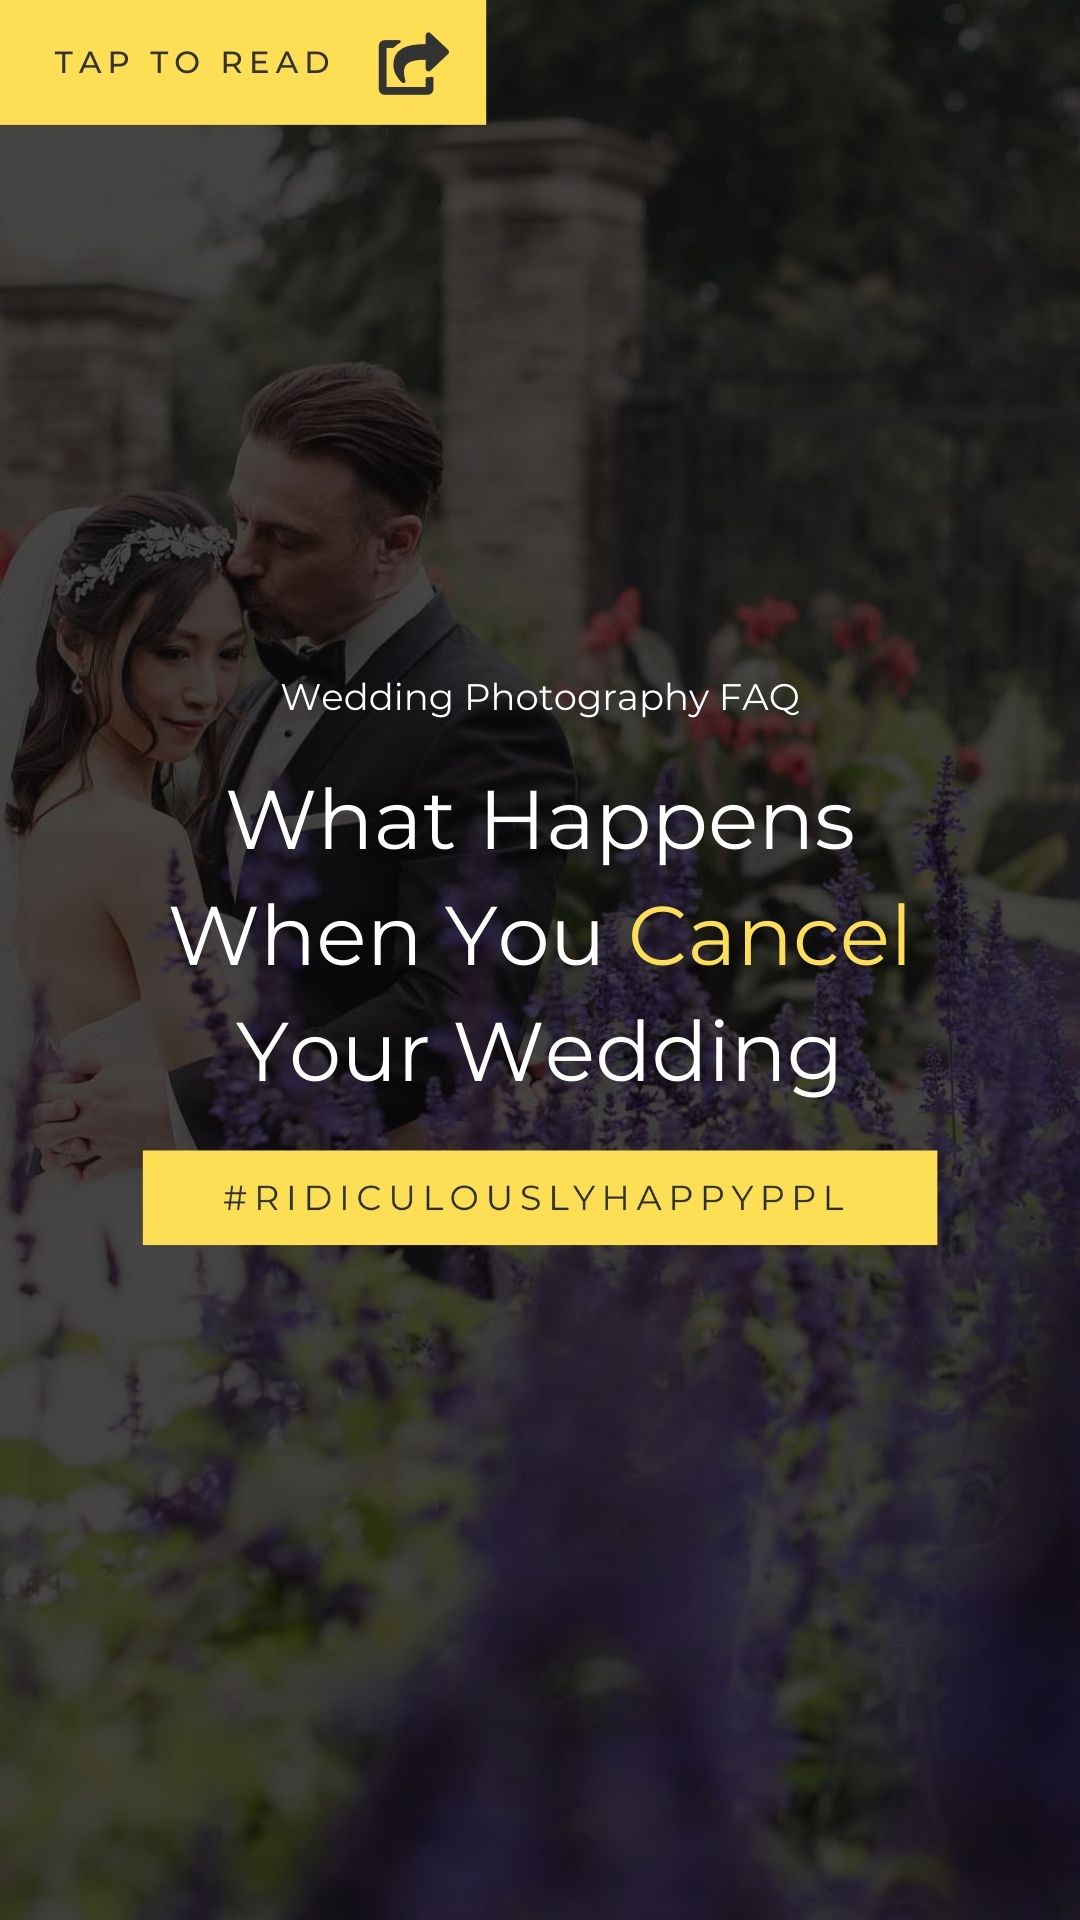 What Happens If We Cancel Our Wedding?